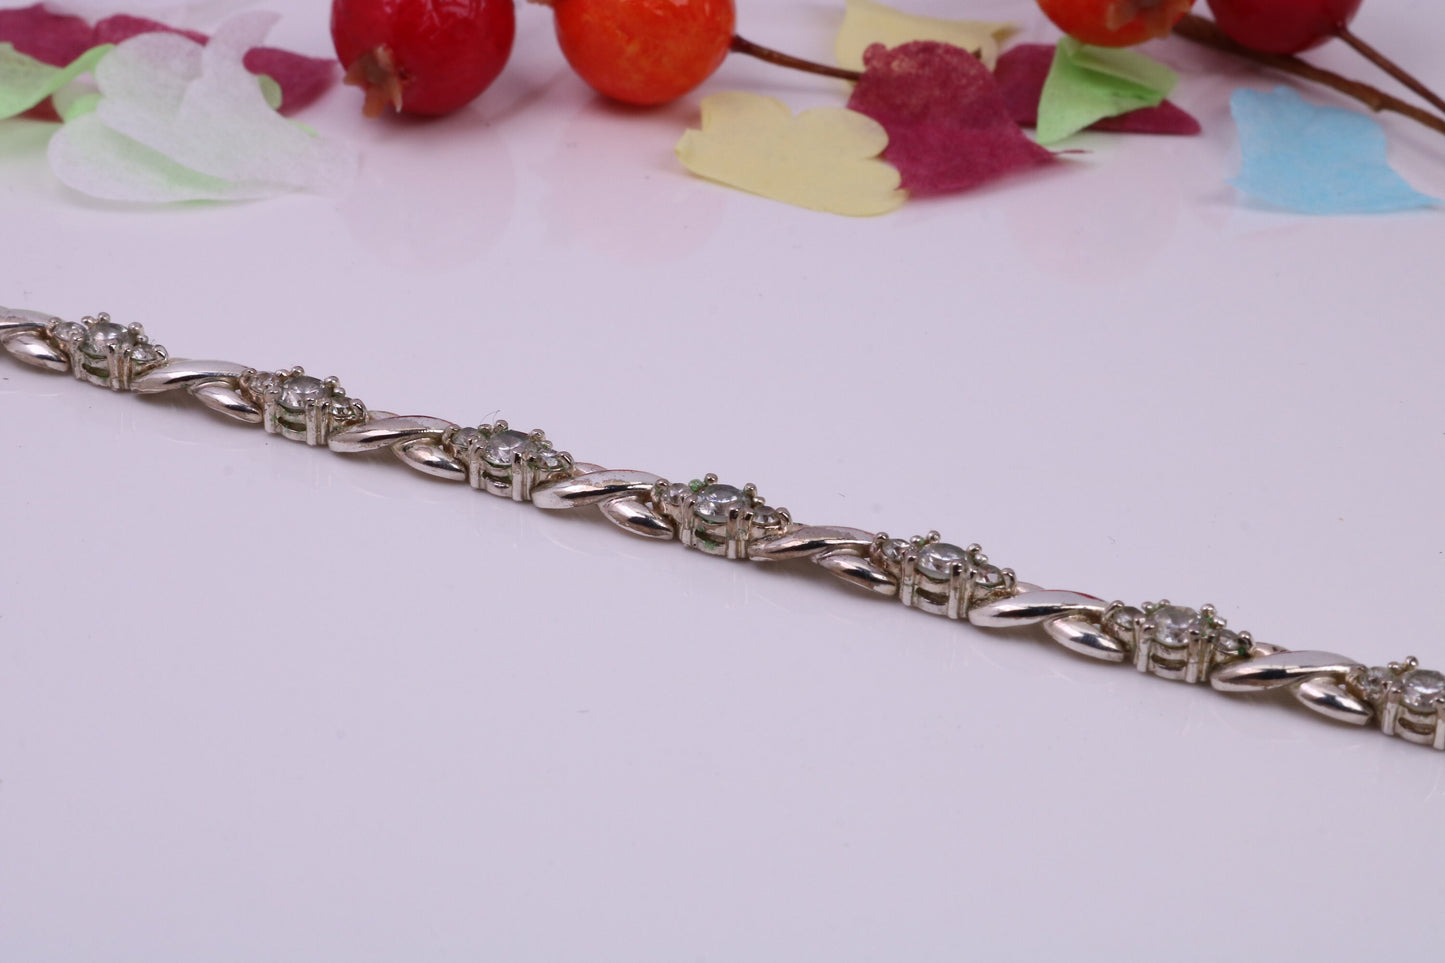 Cubic Zirconia set Tennis Bracelet, made from solid Sterling Silver, Platinum and Diamond Look for a Fraction of the cost